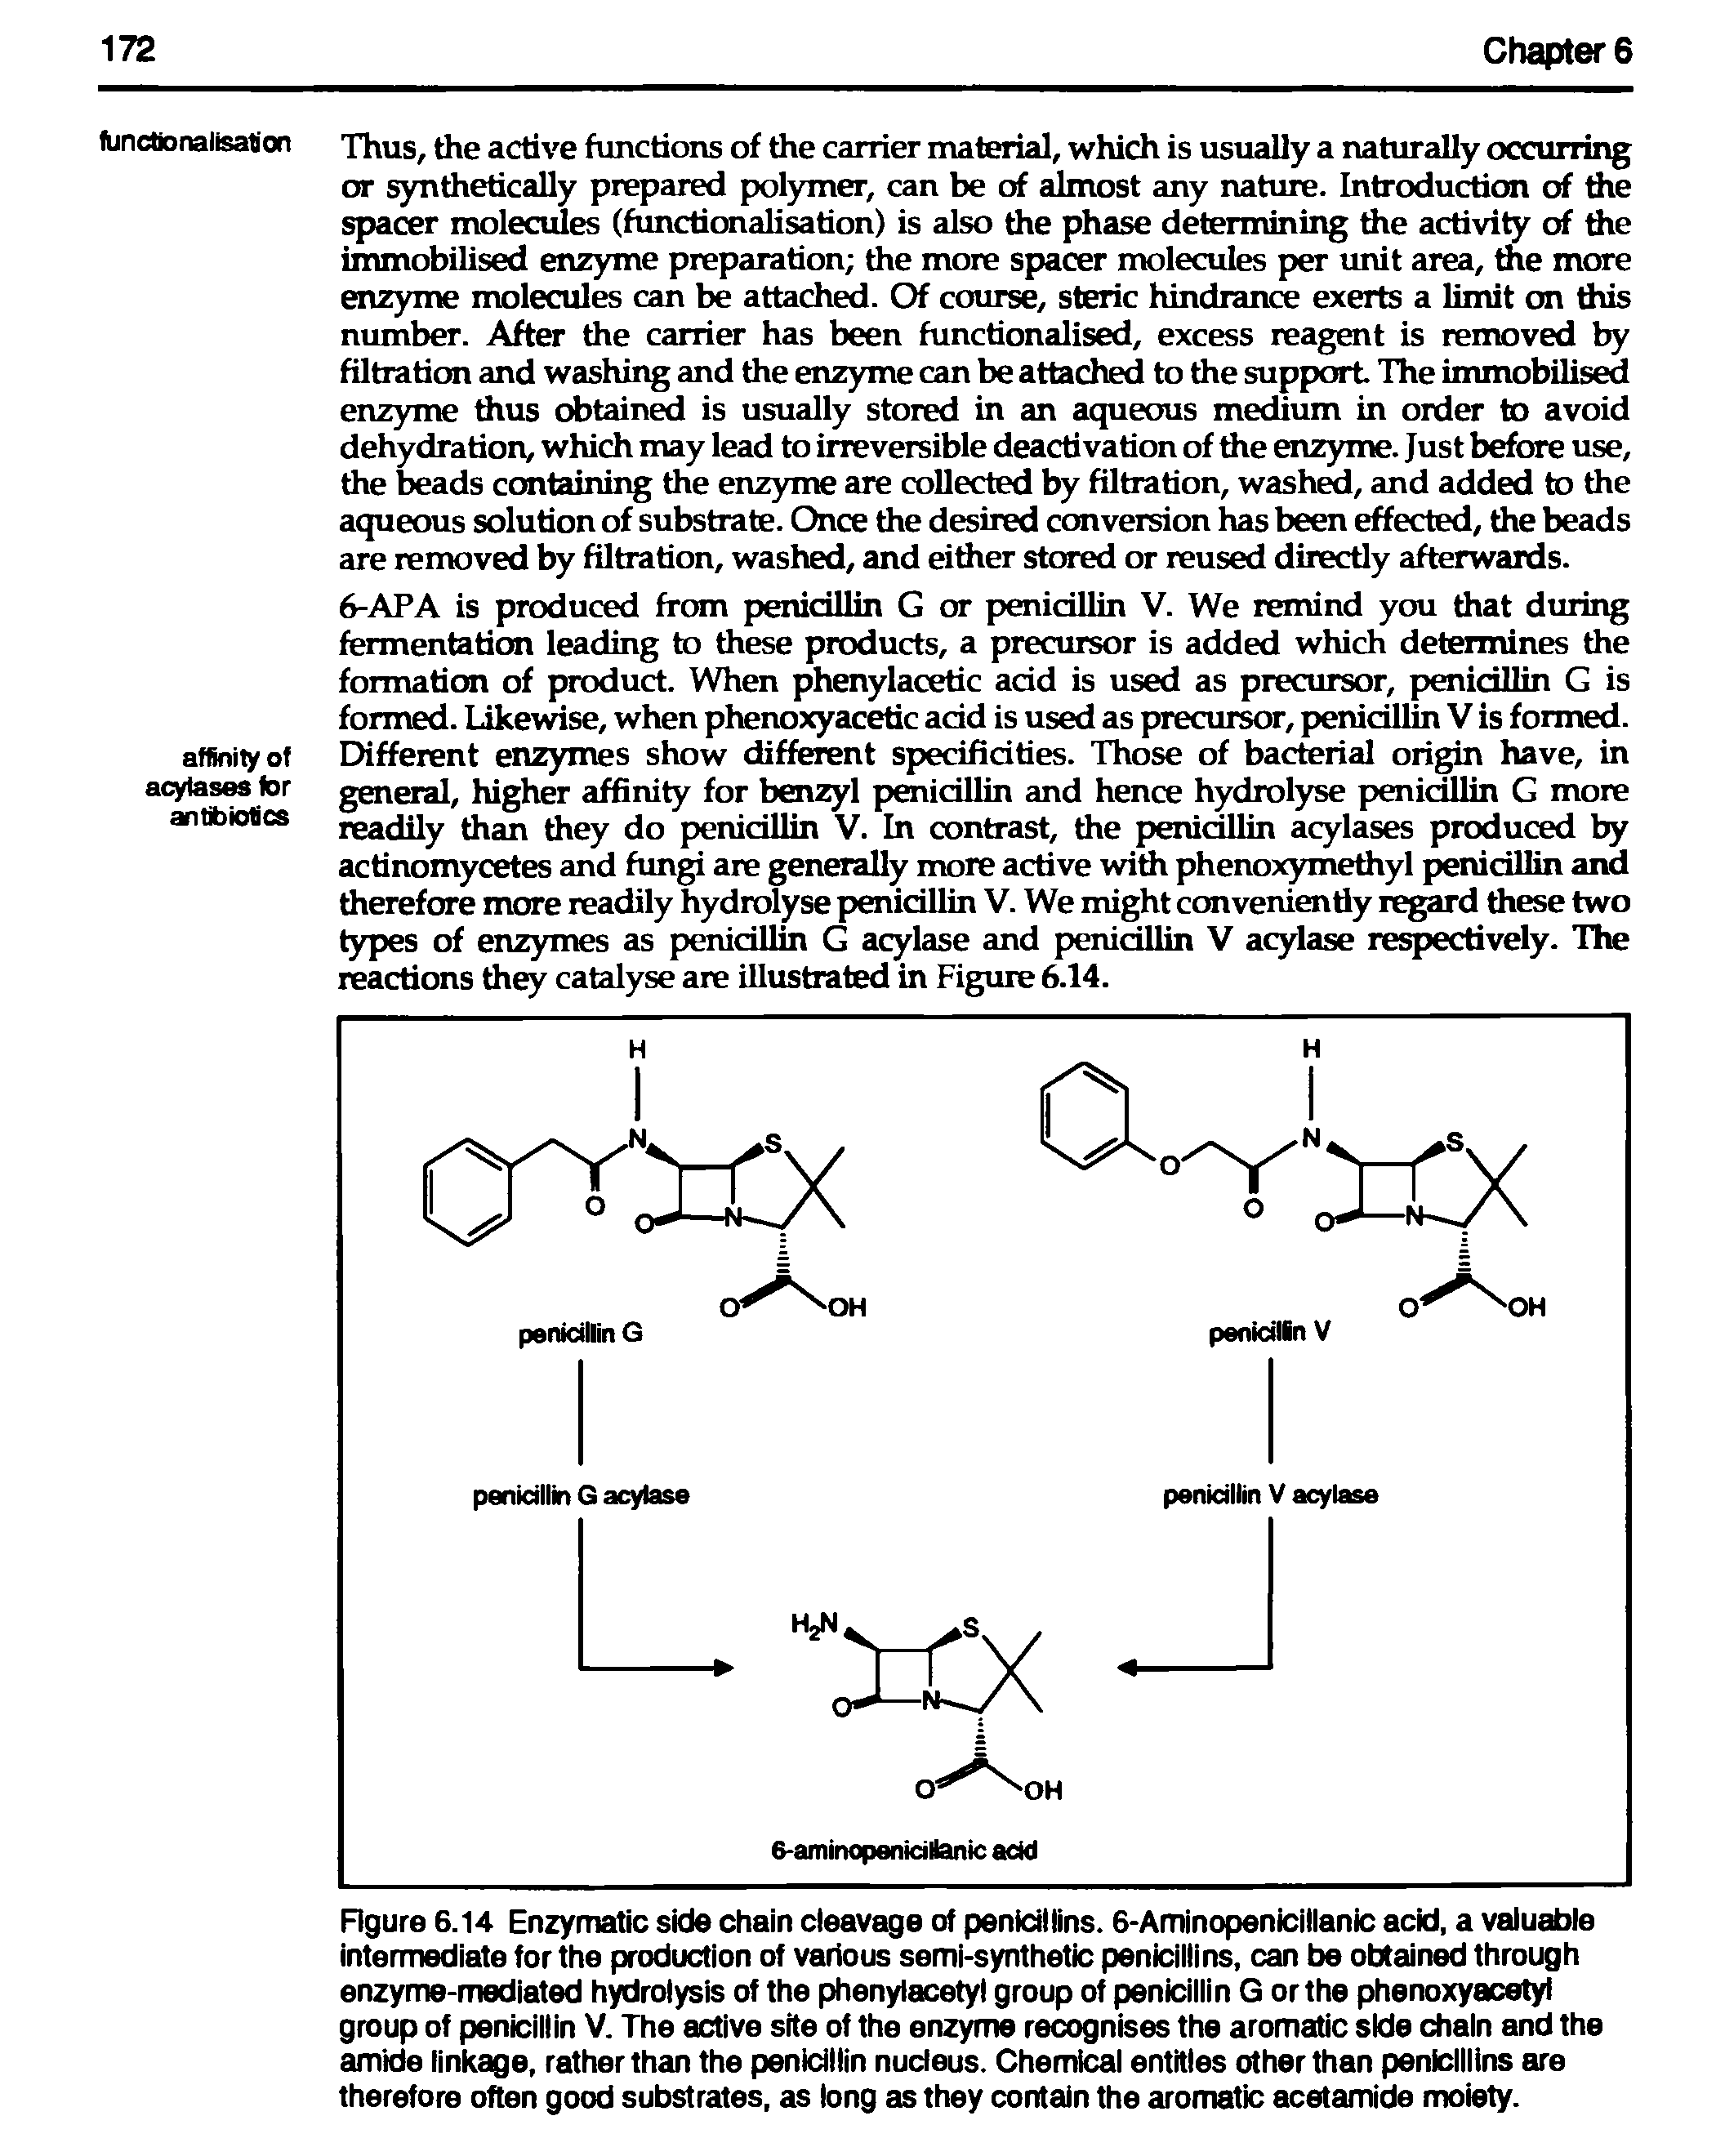 Figure 6.14 Enzymatic side chain cleavage of penicillins. 6-Aminopenicillanic acid, a valuable intermediate for the production of various semi-synthetic penicillins, can be obtained through enzyme-mediated hydrolysis of the phenylacety group of penicillin G or the phenoxyacetyl group of penicillin V. The active site of the enzyme recognises the aromatic side chain and the amide linkage, rather than the penidllin nucleus. Chemical entitles other than penicillins are therefore often good substrates, as long as they contain the aromatic acetamide moiety.